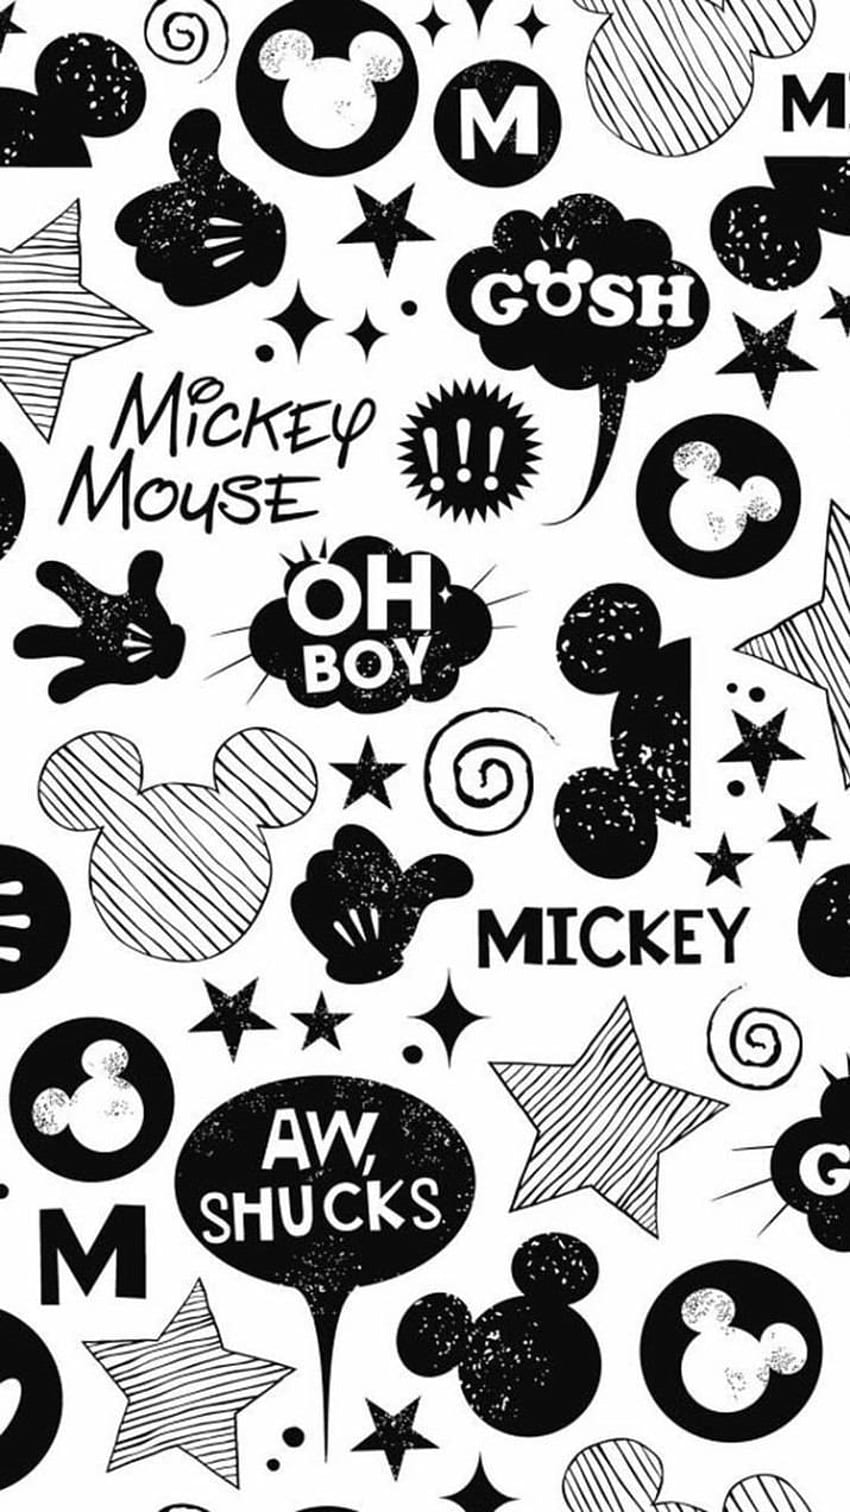 Mickey Mouse iPhone - Latar Belakang iPhone Mickey Mouse Teratas - Mickey mouse, iphone disney, ponsel Mickey mouse, Hipster Mickey dan Minnie wallpaper ponsel HD